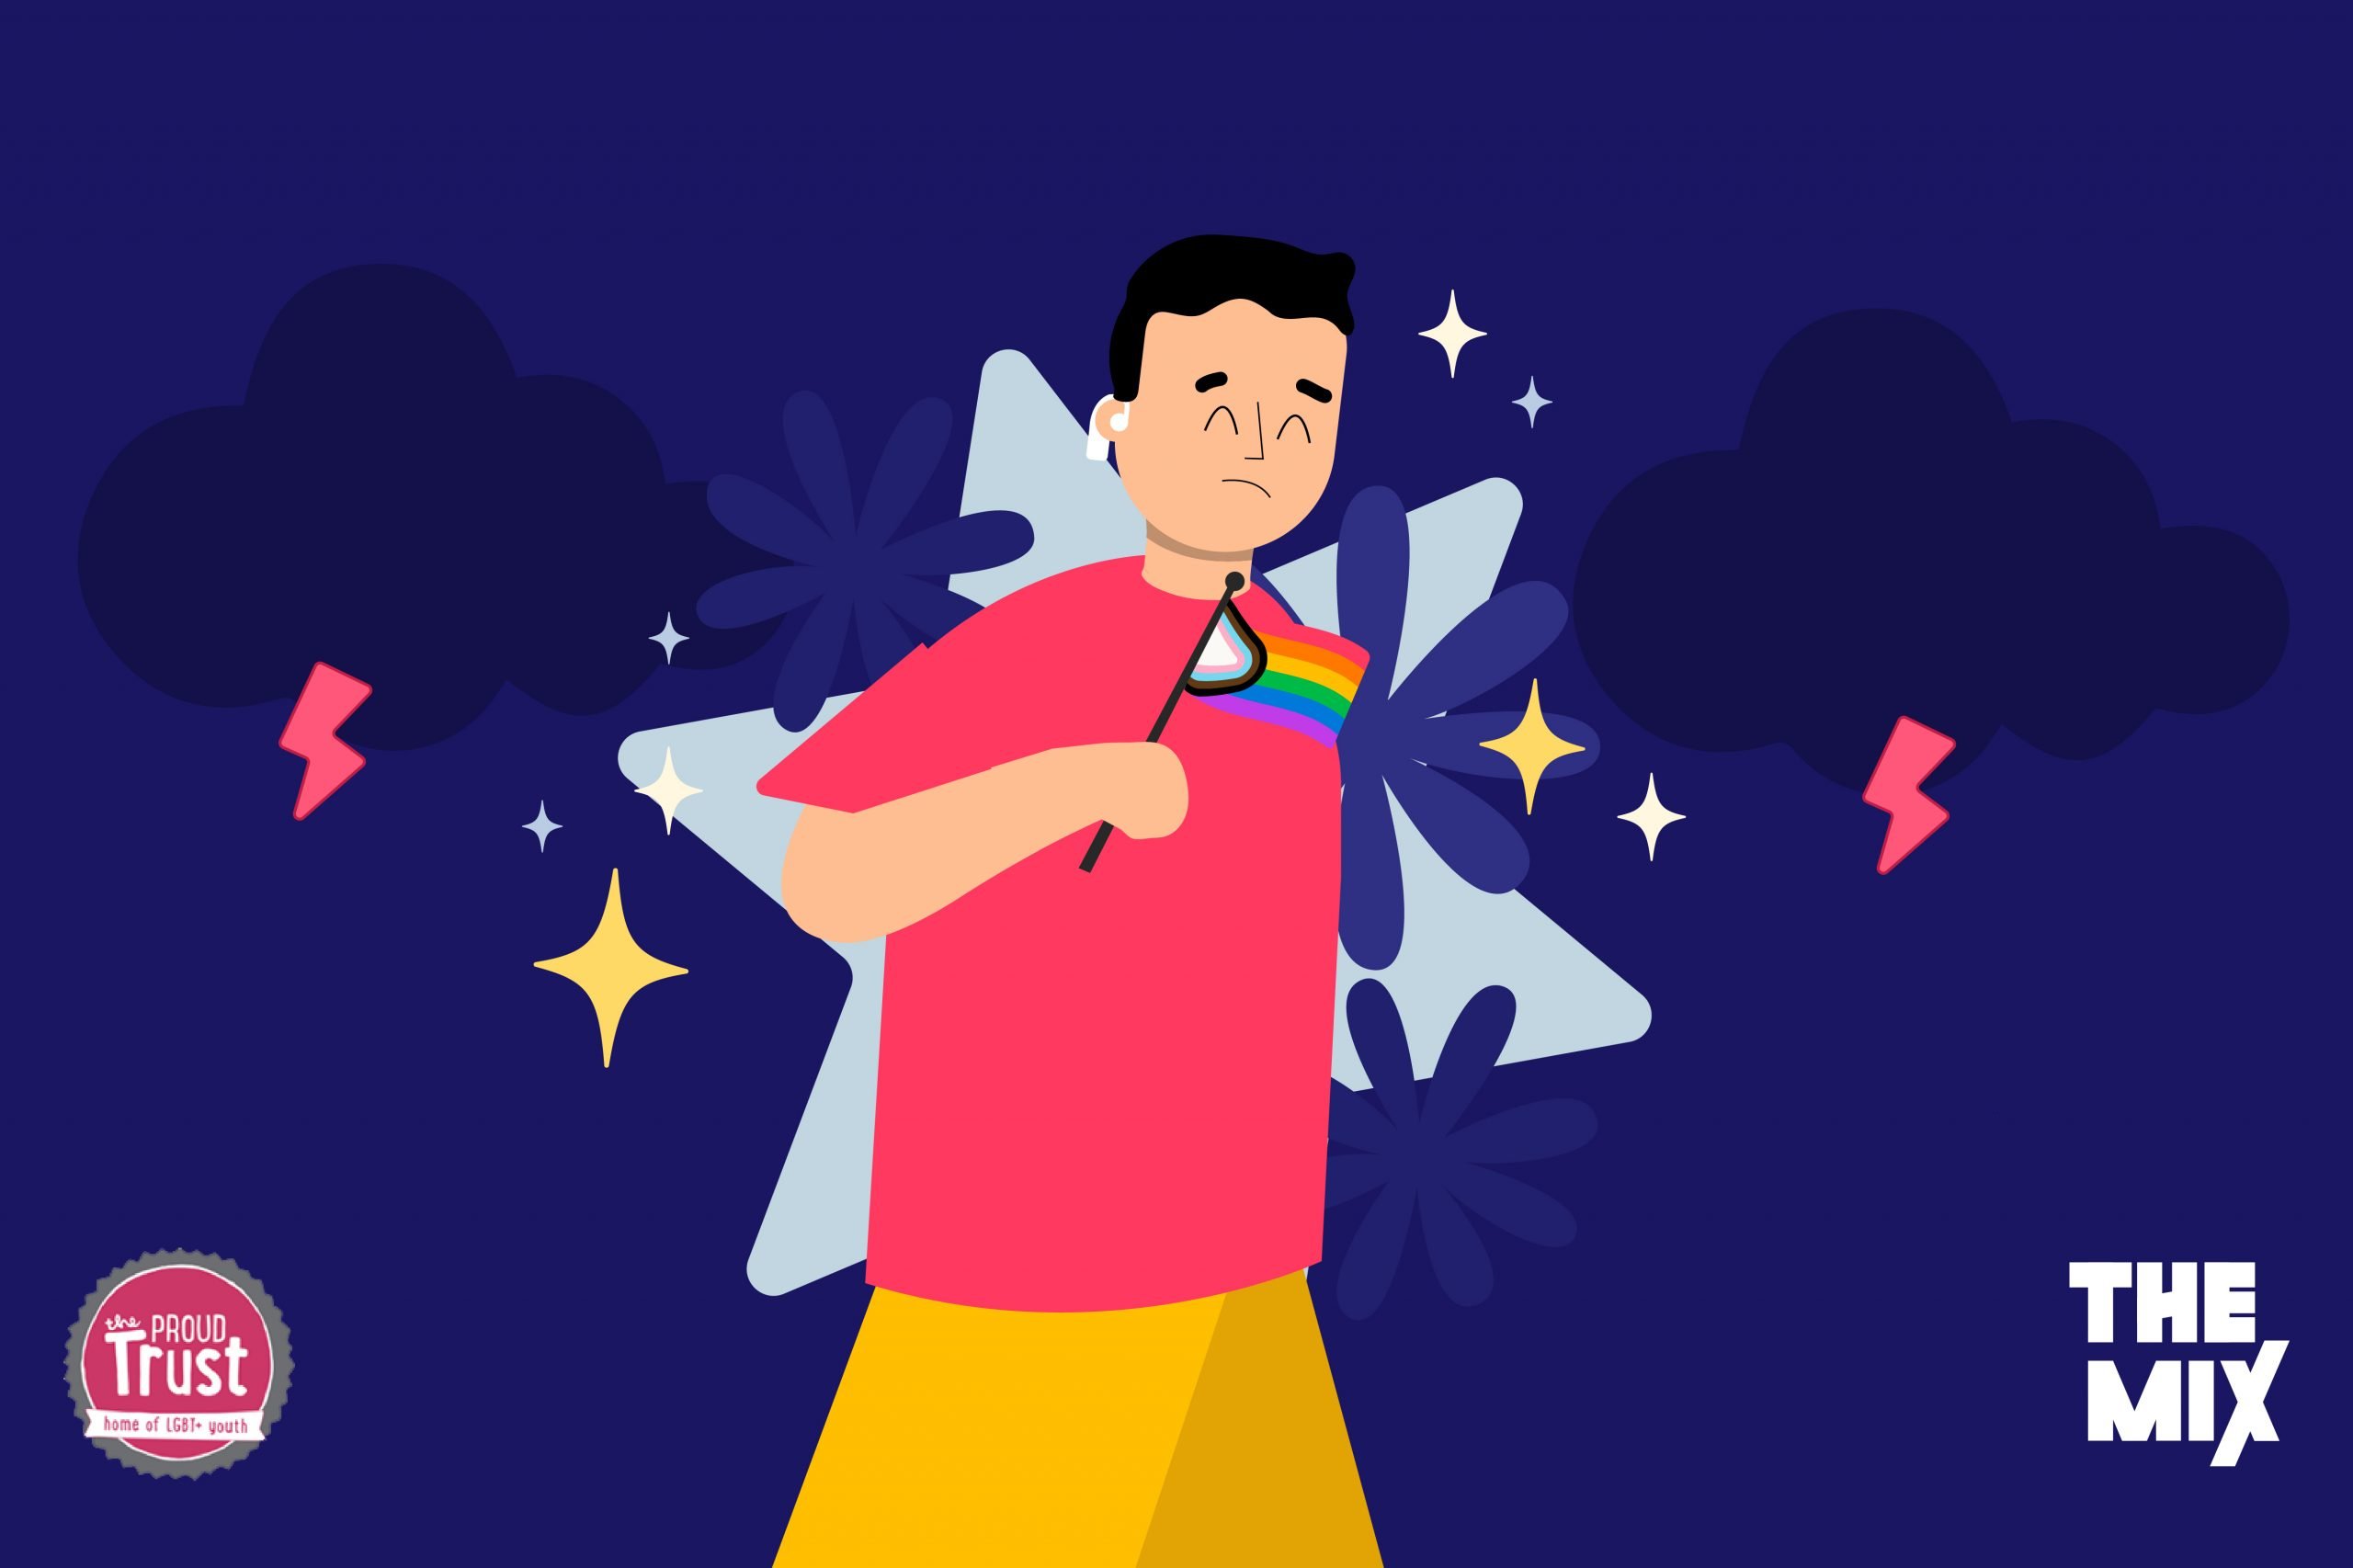 A young person wearing a hearing aid and a red t-shirt is waving an LGBTQ+ pride flag. There is a star in the background and stars and lightening bolts to represent transphobia and homophobia